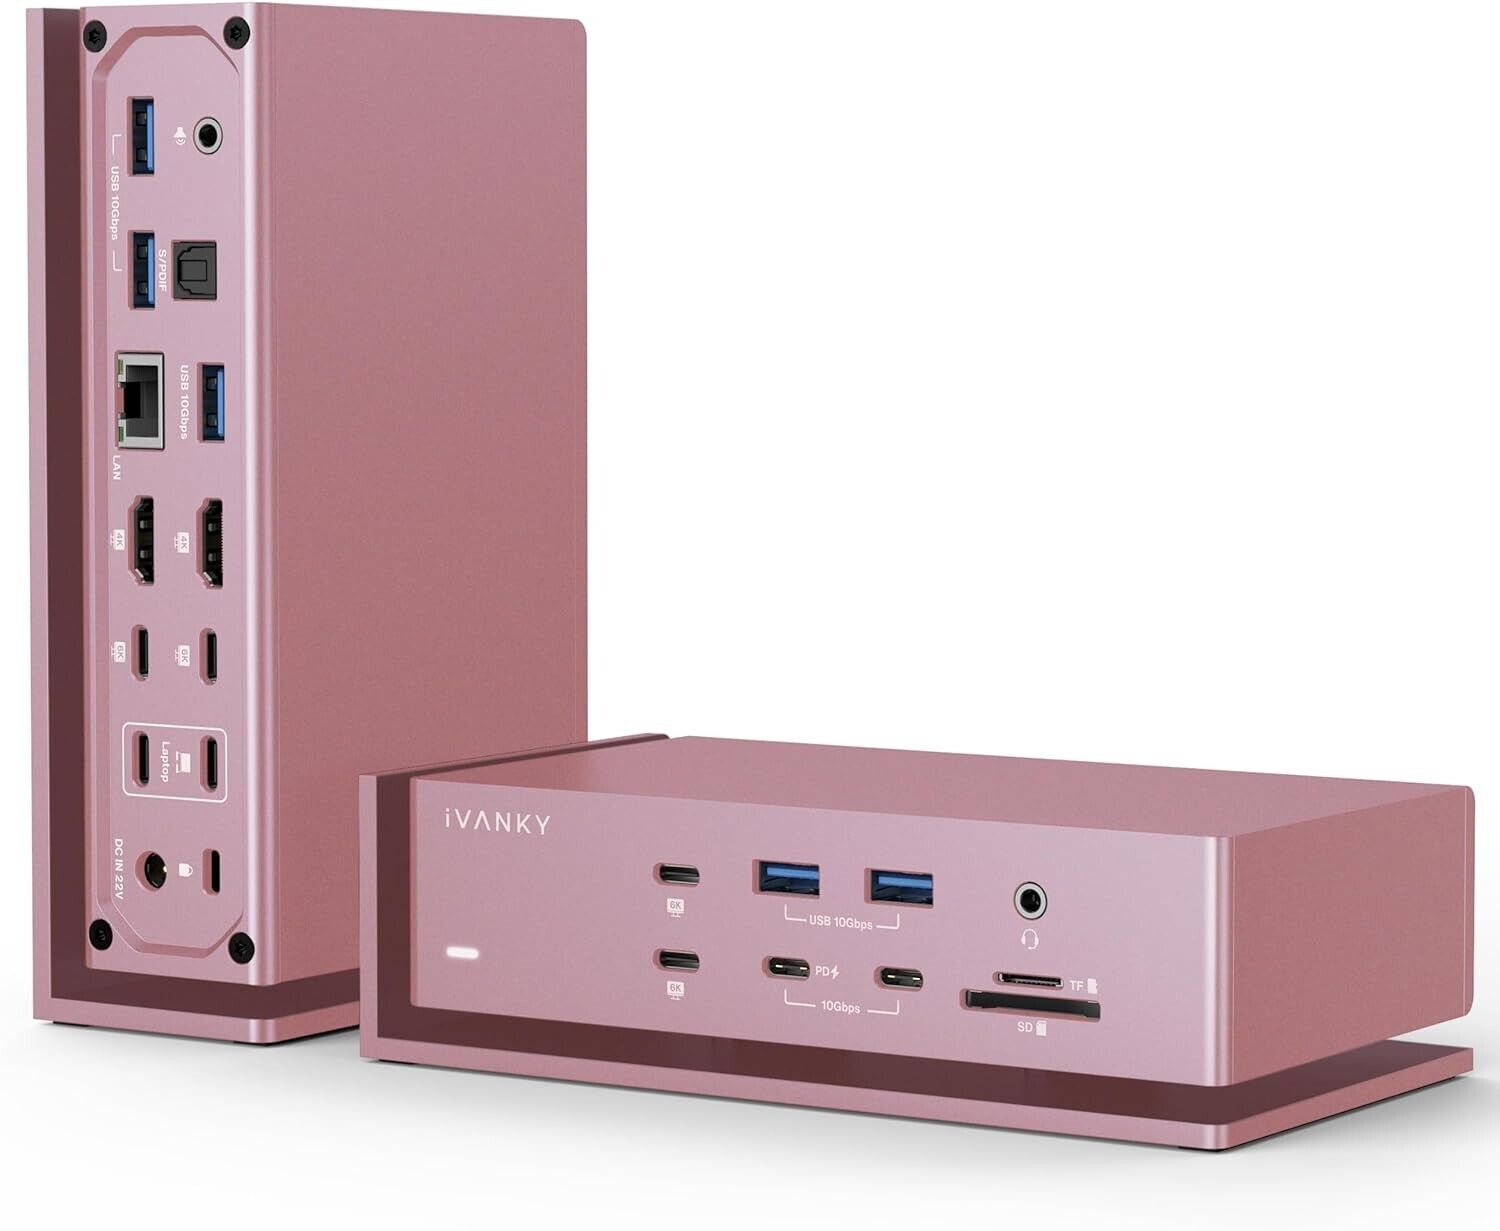 NEW iVANKY FusionDock Max 1 Dual Thunderbolt 4 Chips, 20-in-1 VCD10 for Macbook